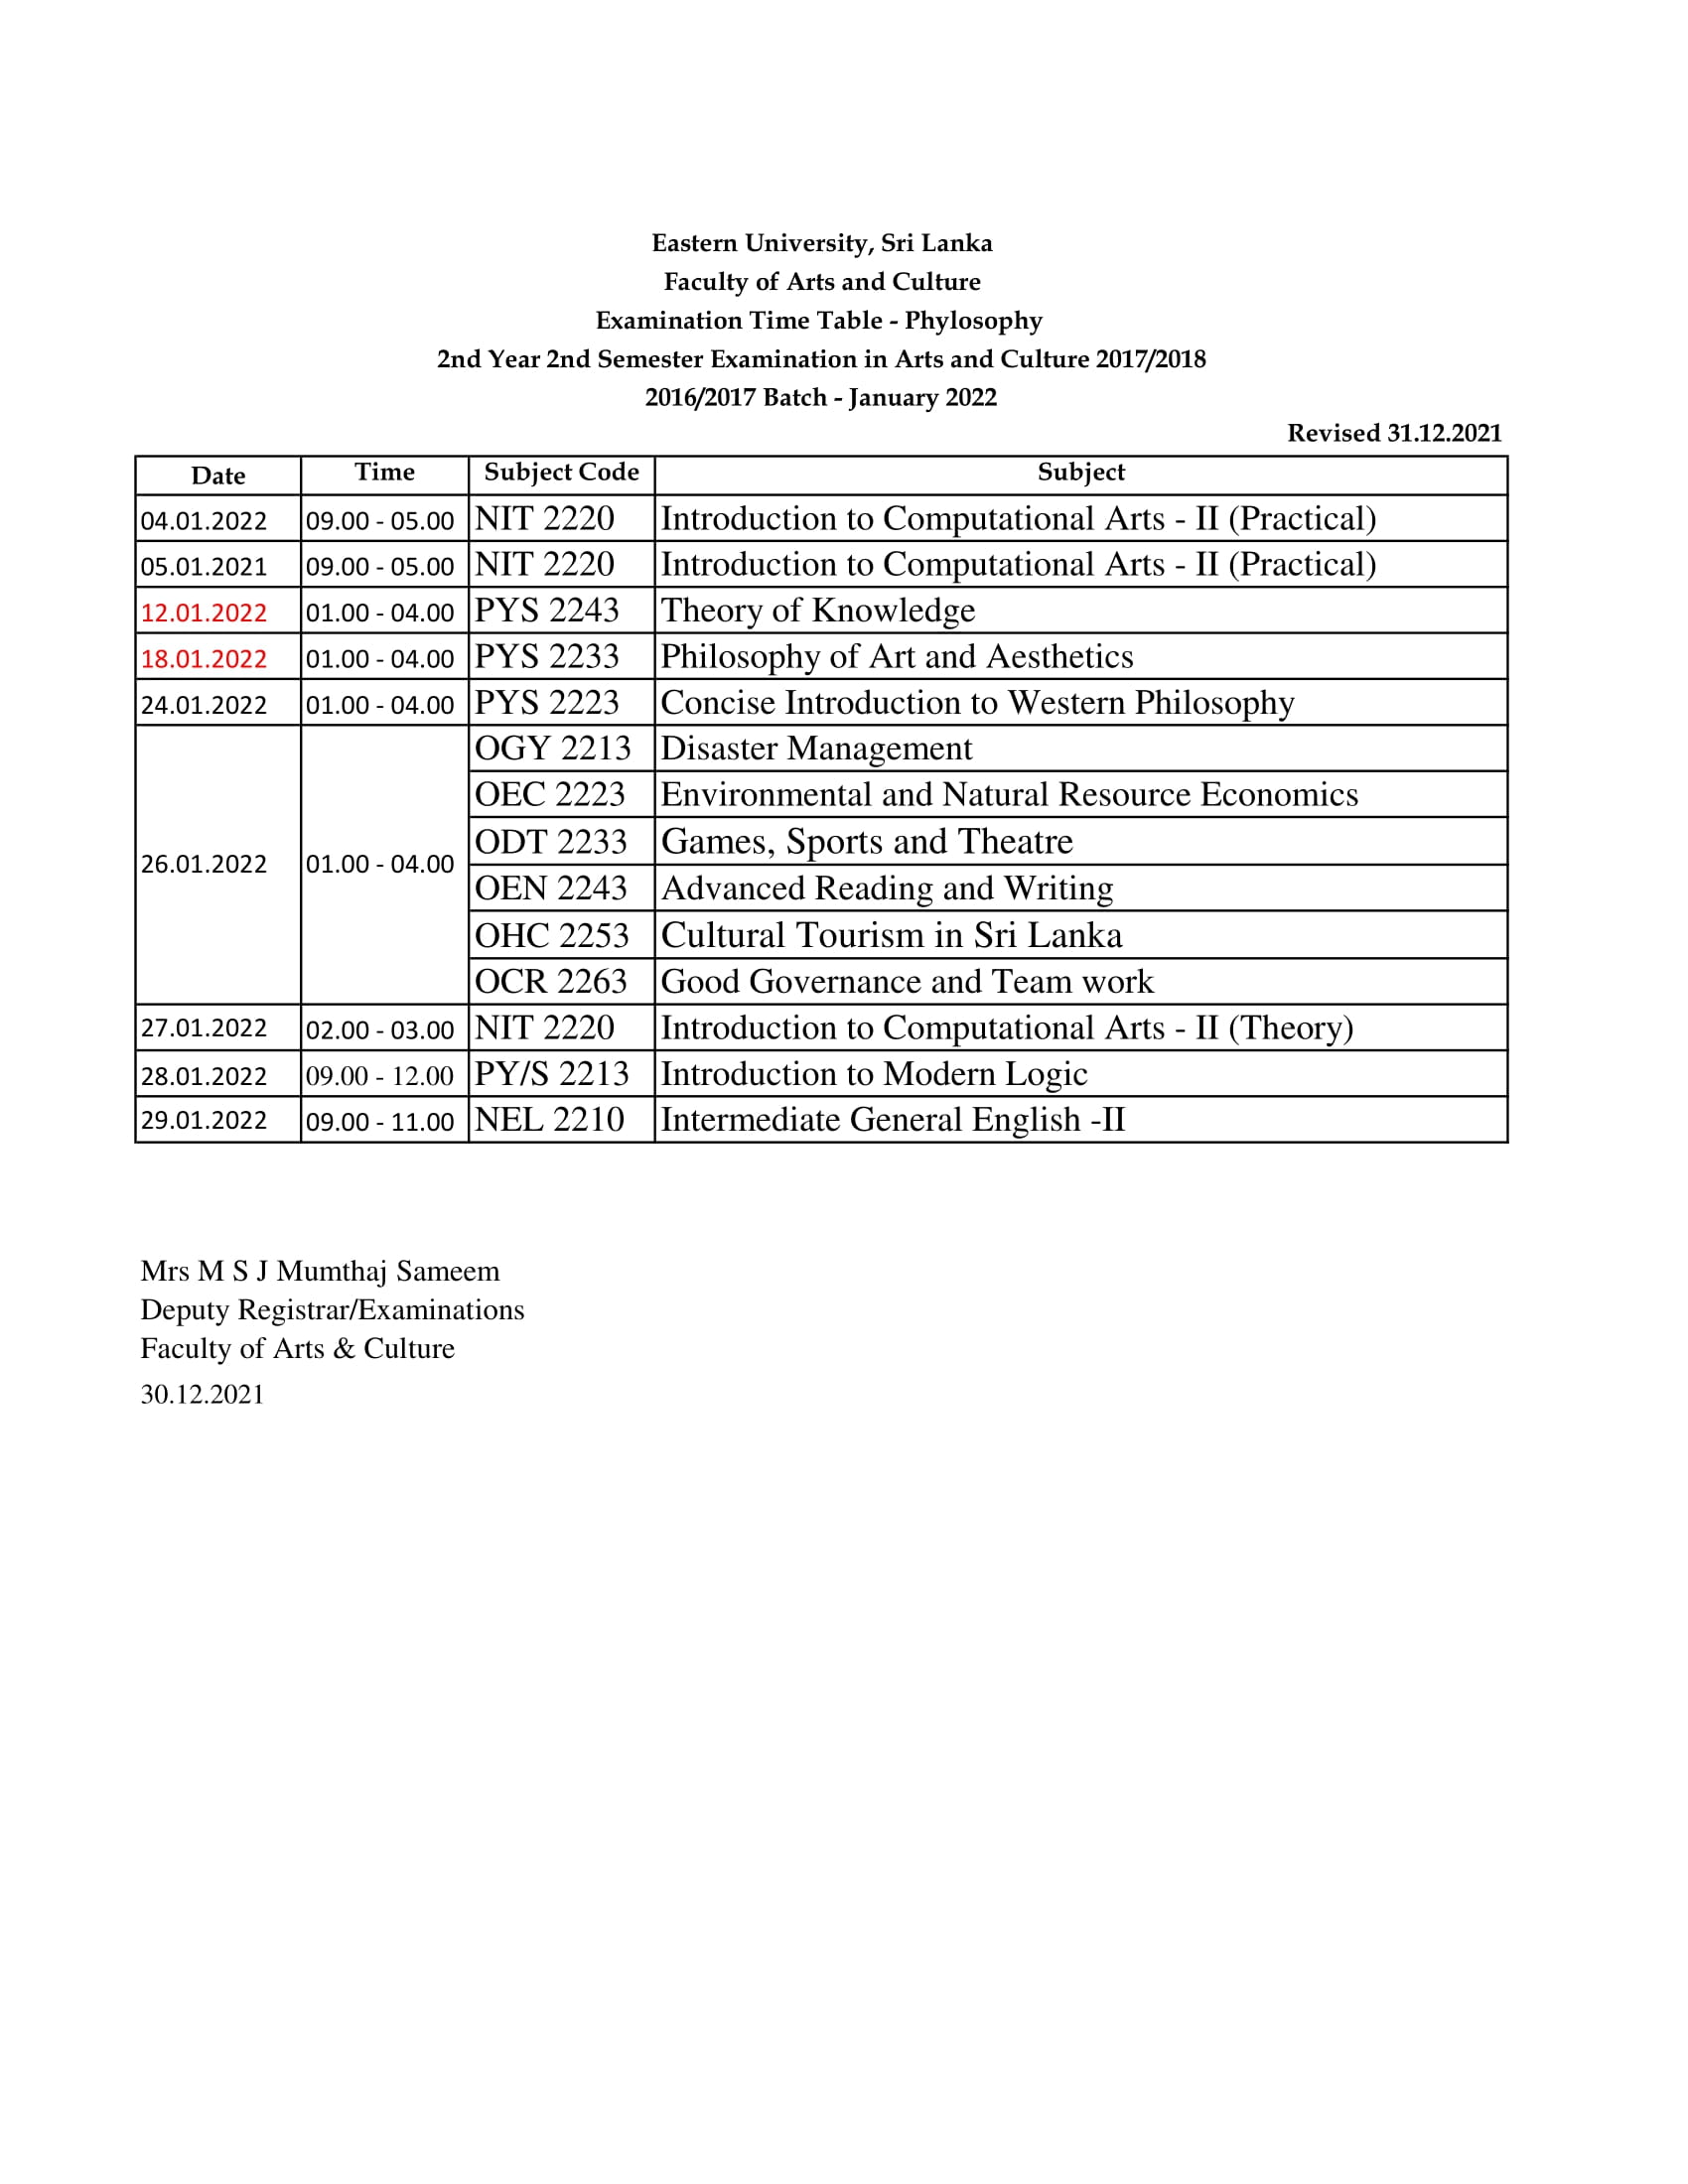 Updated exam time table 2nd year 2nd semester General, Philiosopy special and Economics Special -2.jpg